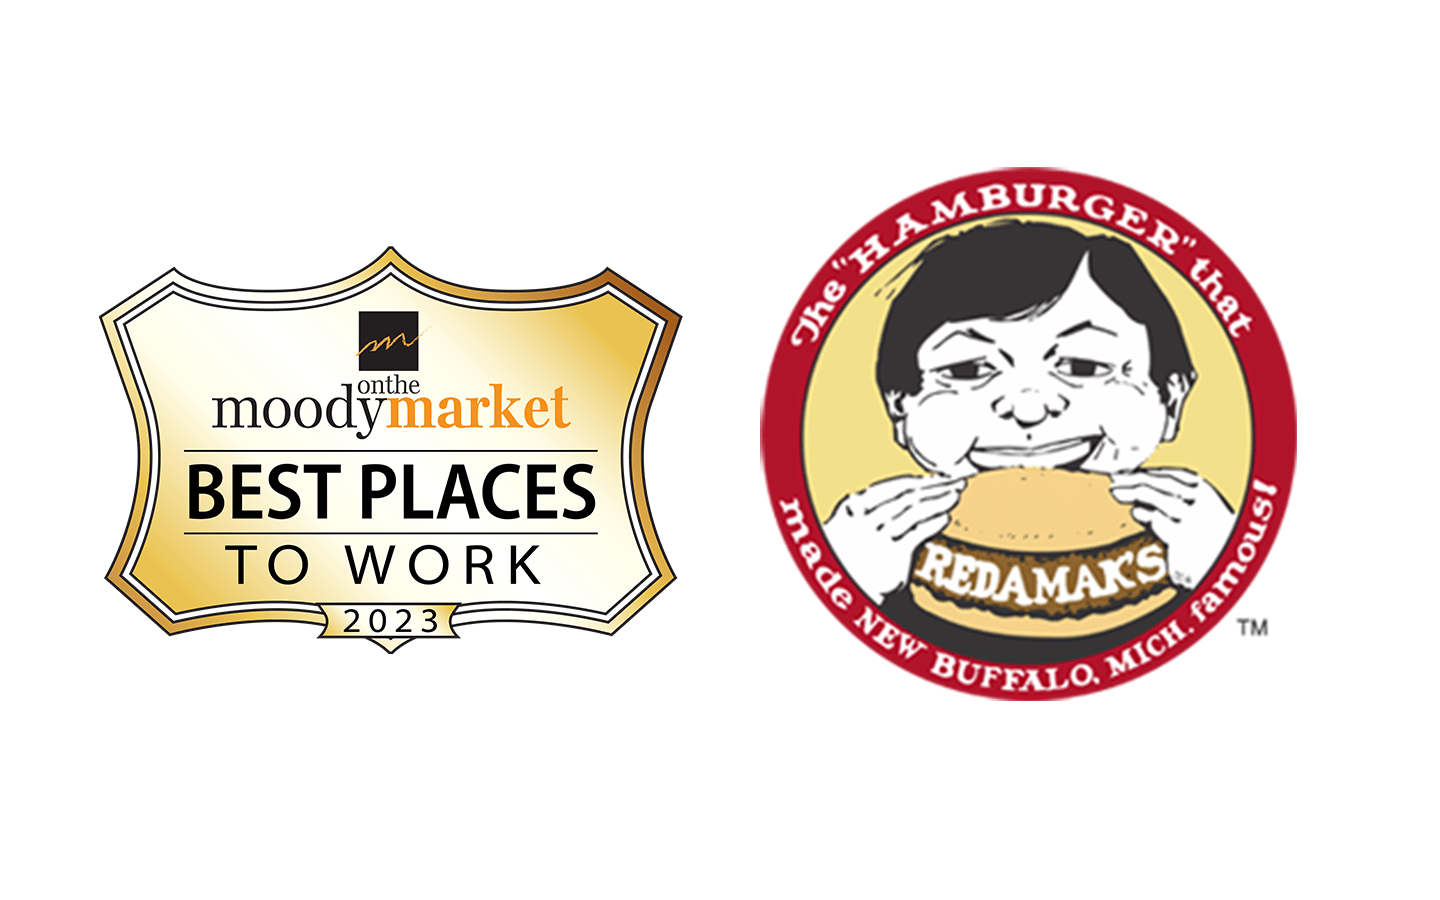 Redamak's Named to 20 Best Places to Work in Southwest Michigan for